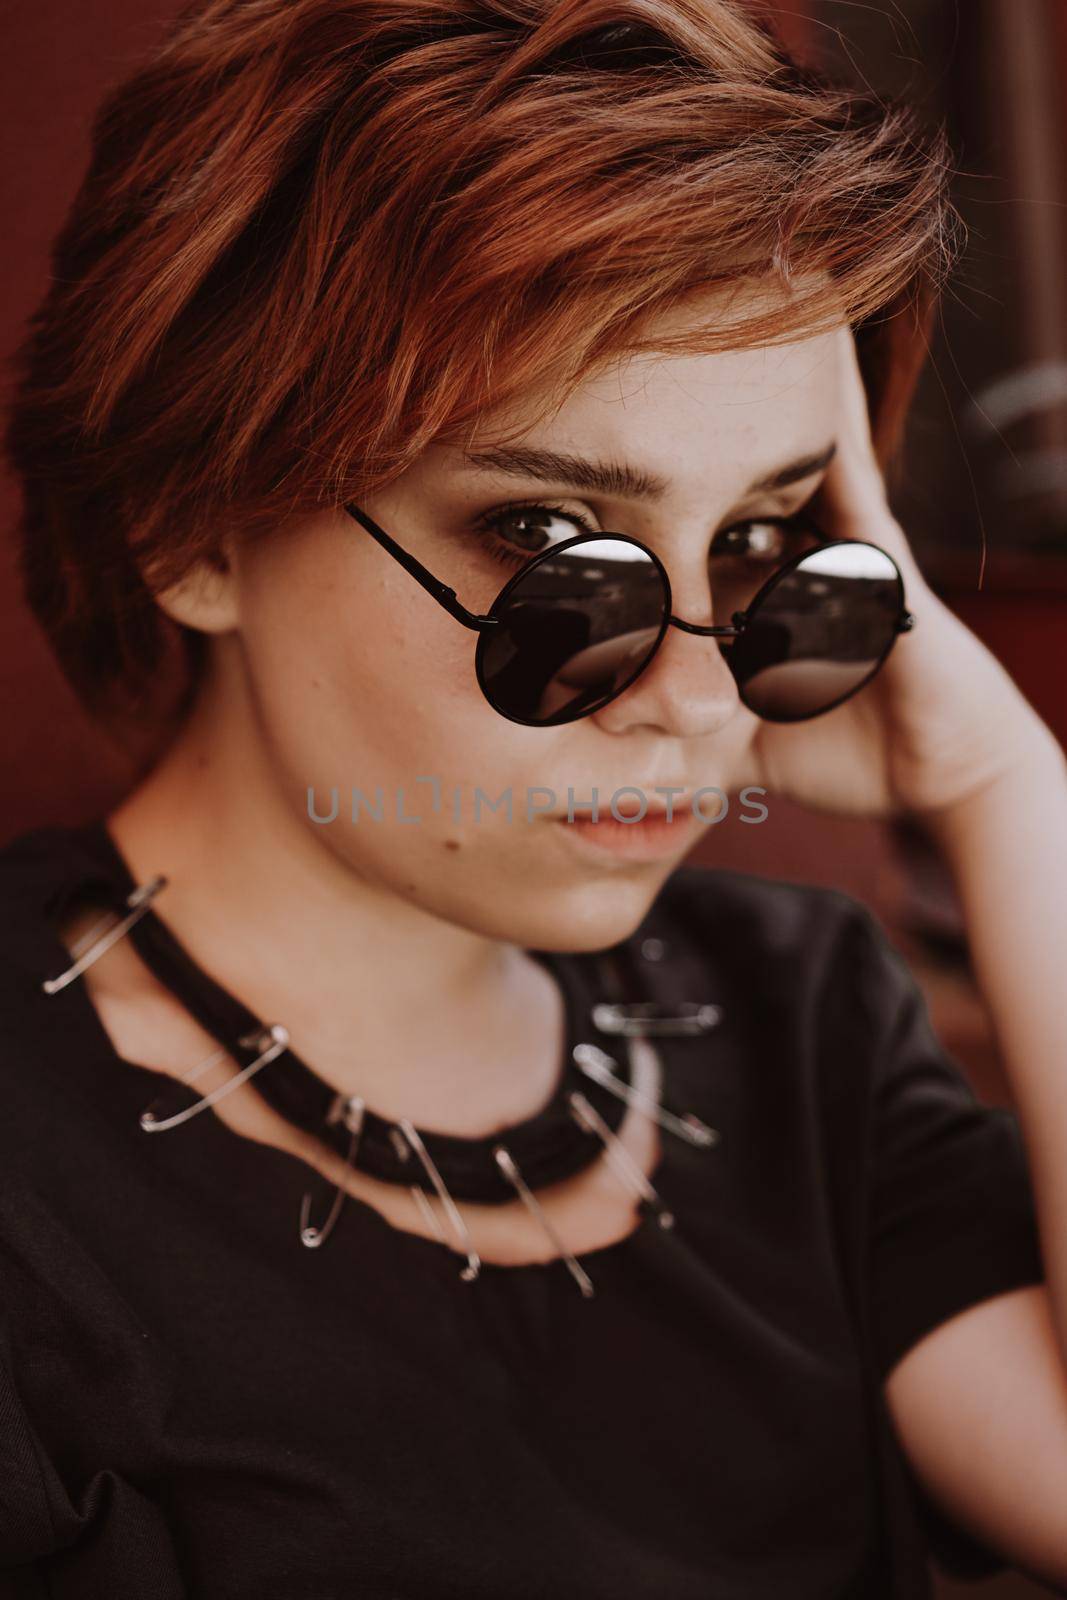 Portrait of attractive cheeky woman with short red hair in sunglasses at back yard in the old city with red walls